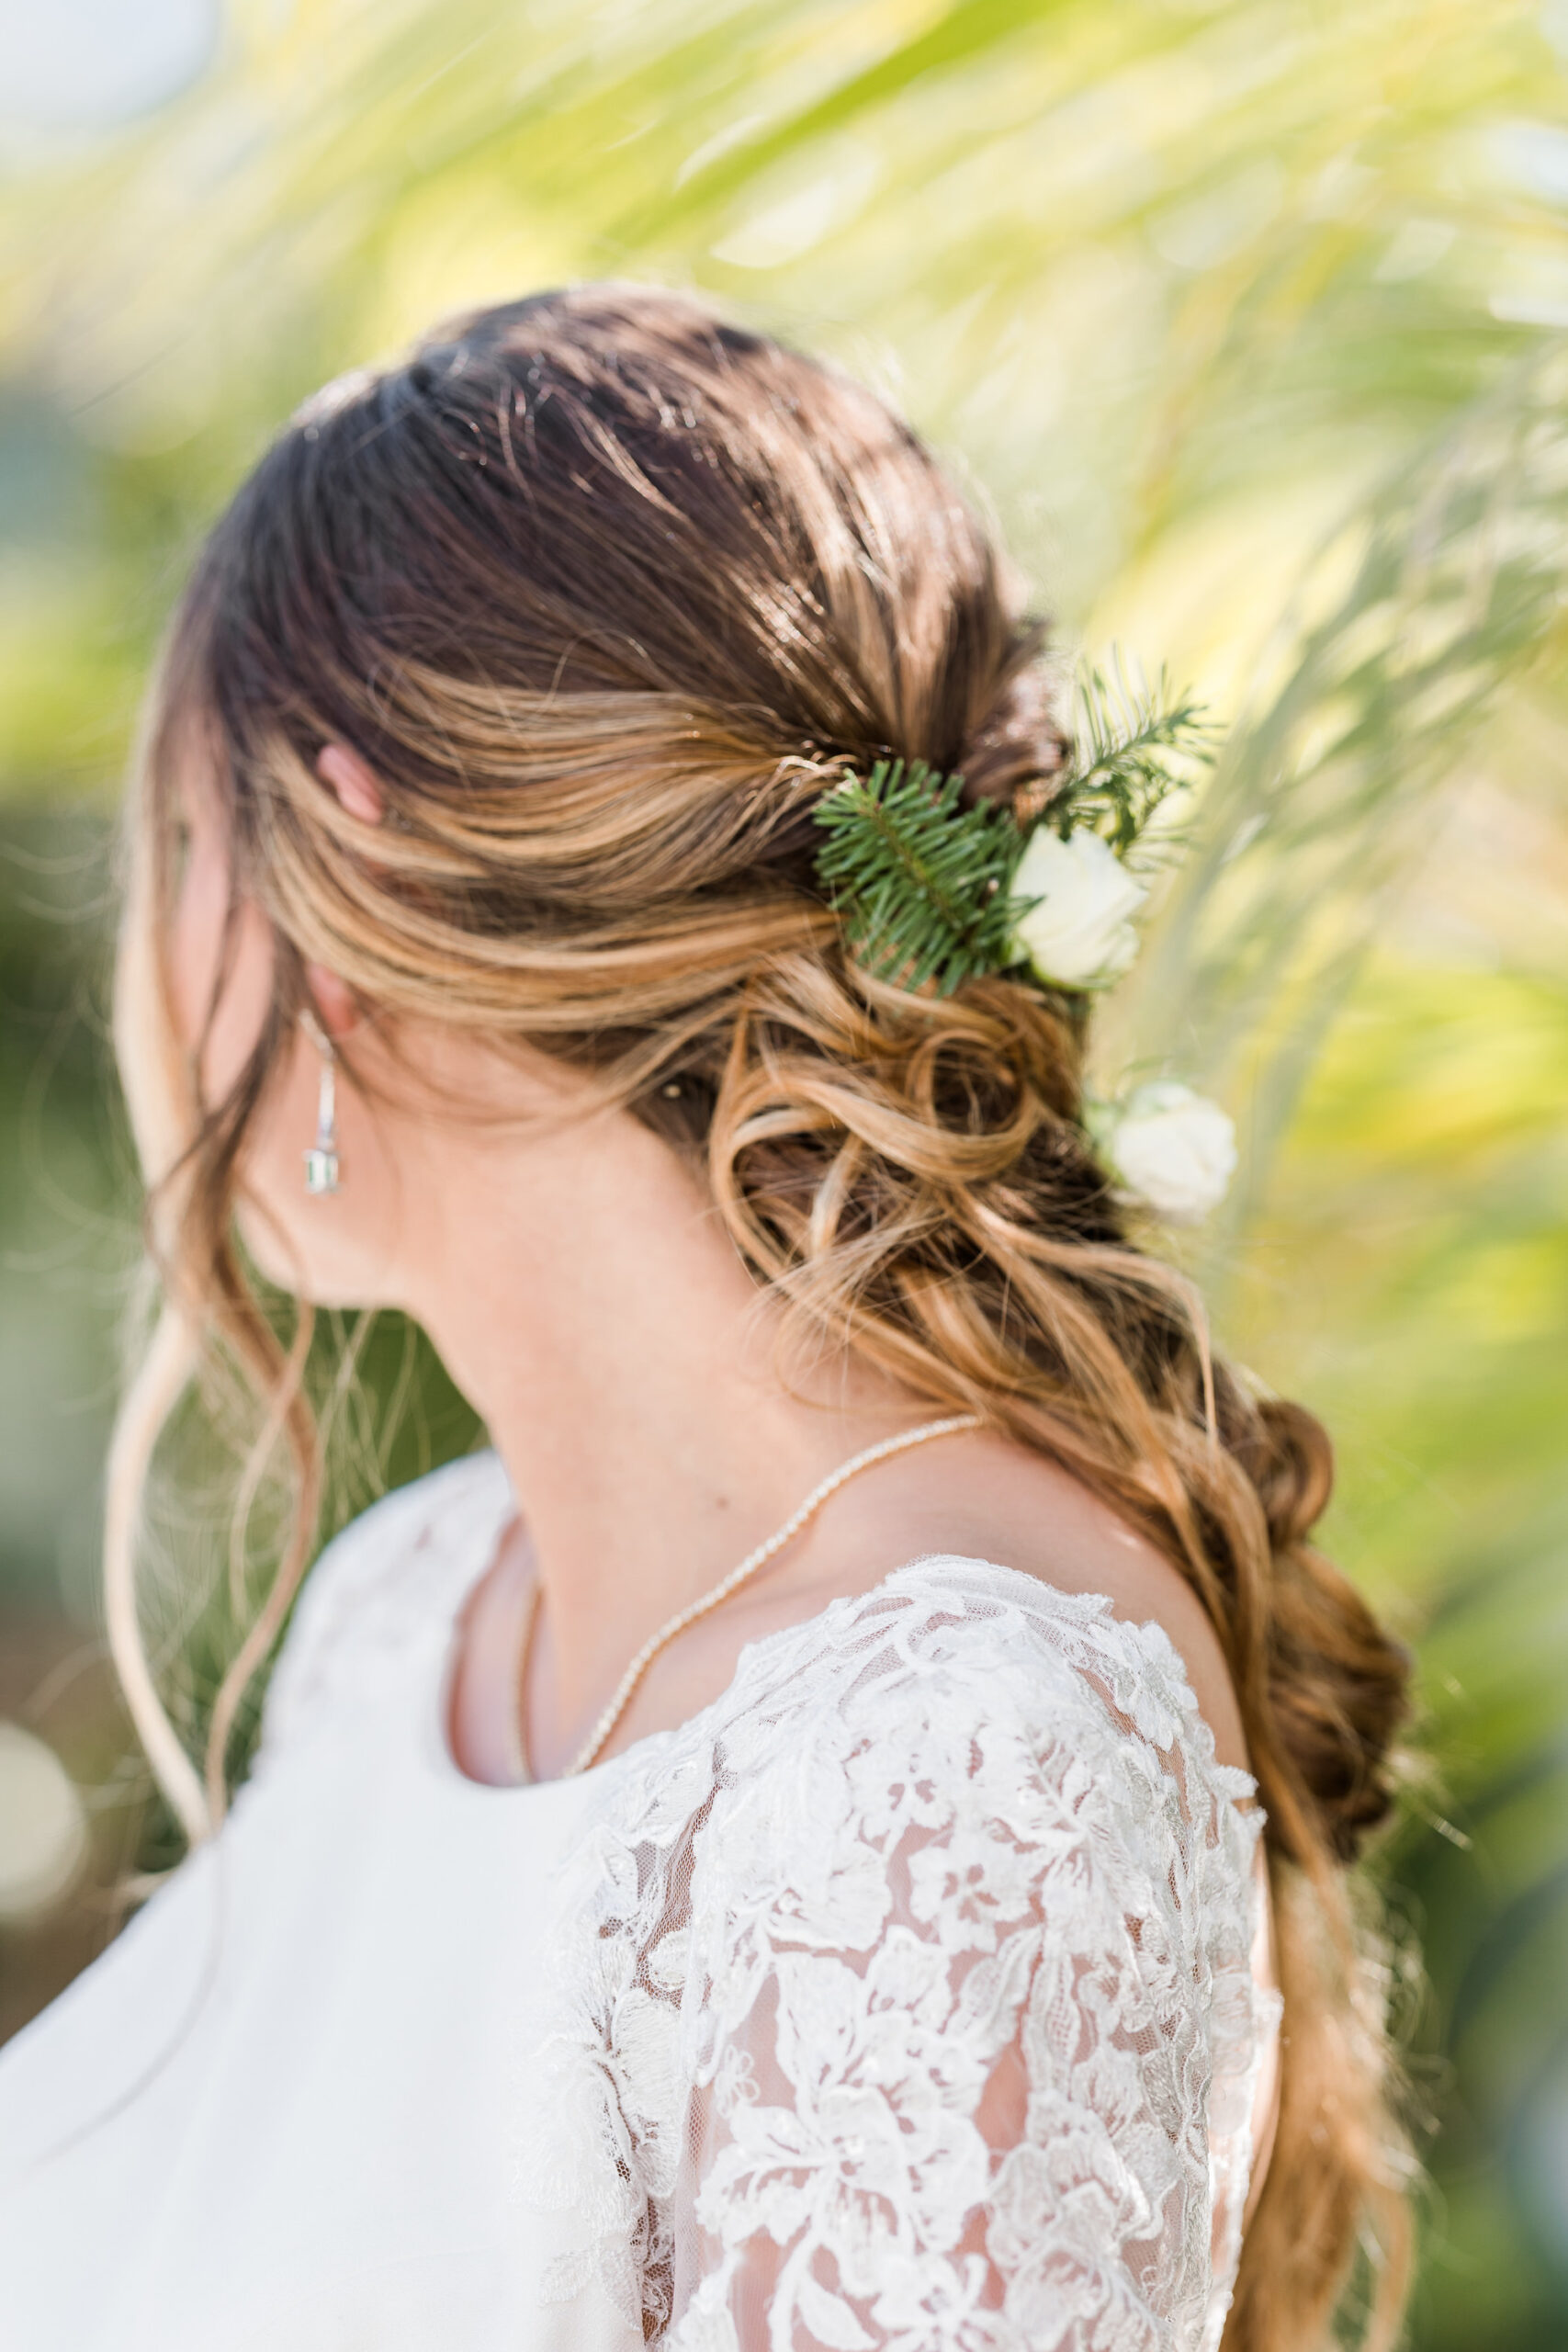 Boho Whimsical Bride Braided Hair with Pine and White Rose Floral Hairpiece